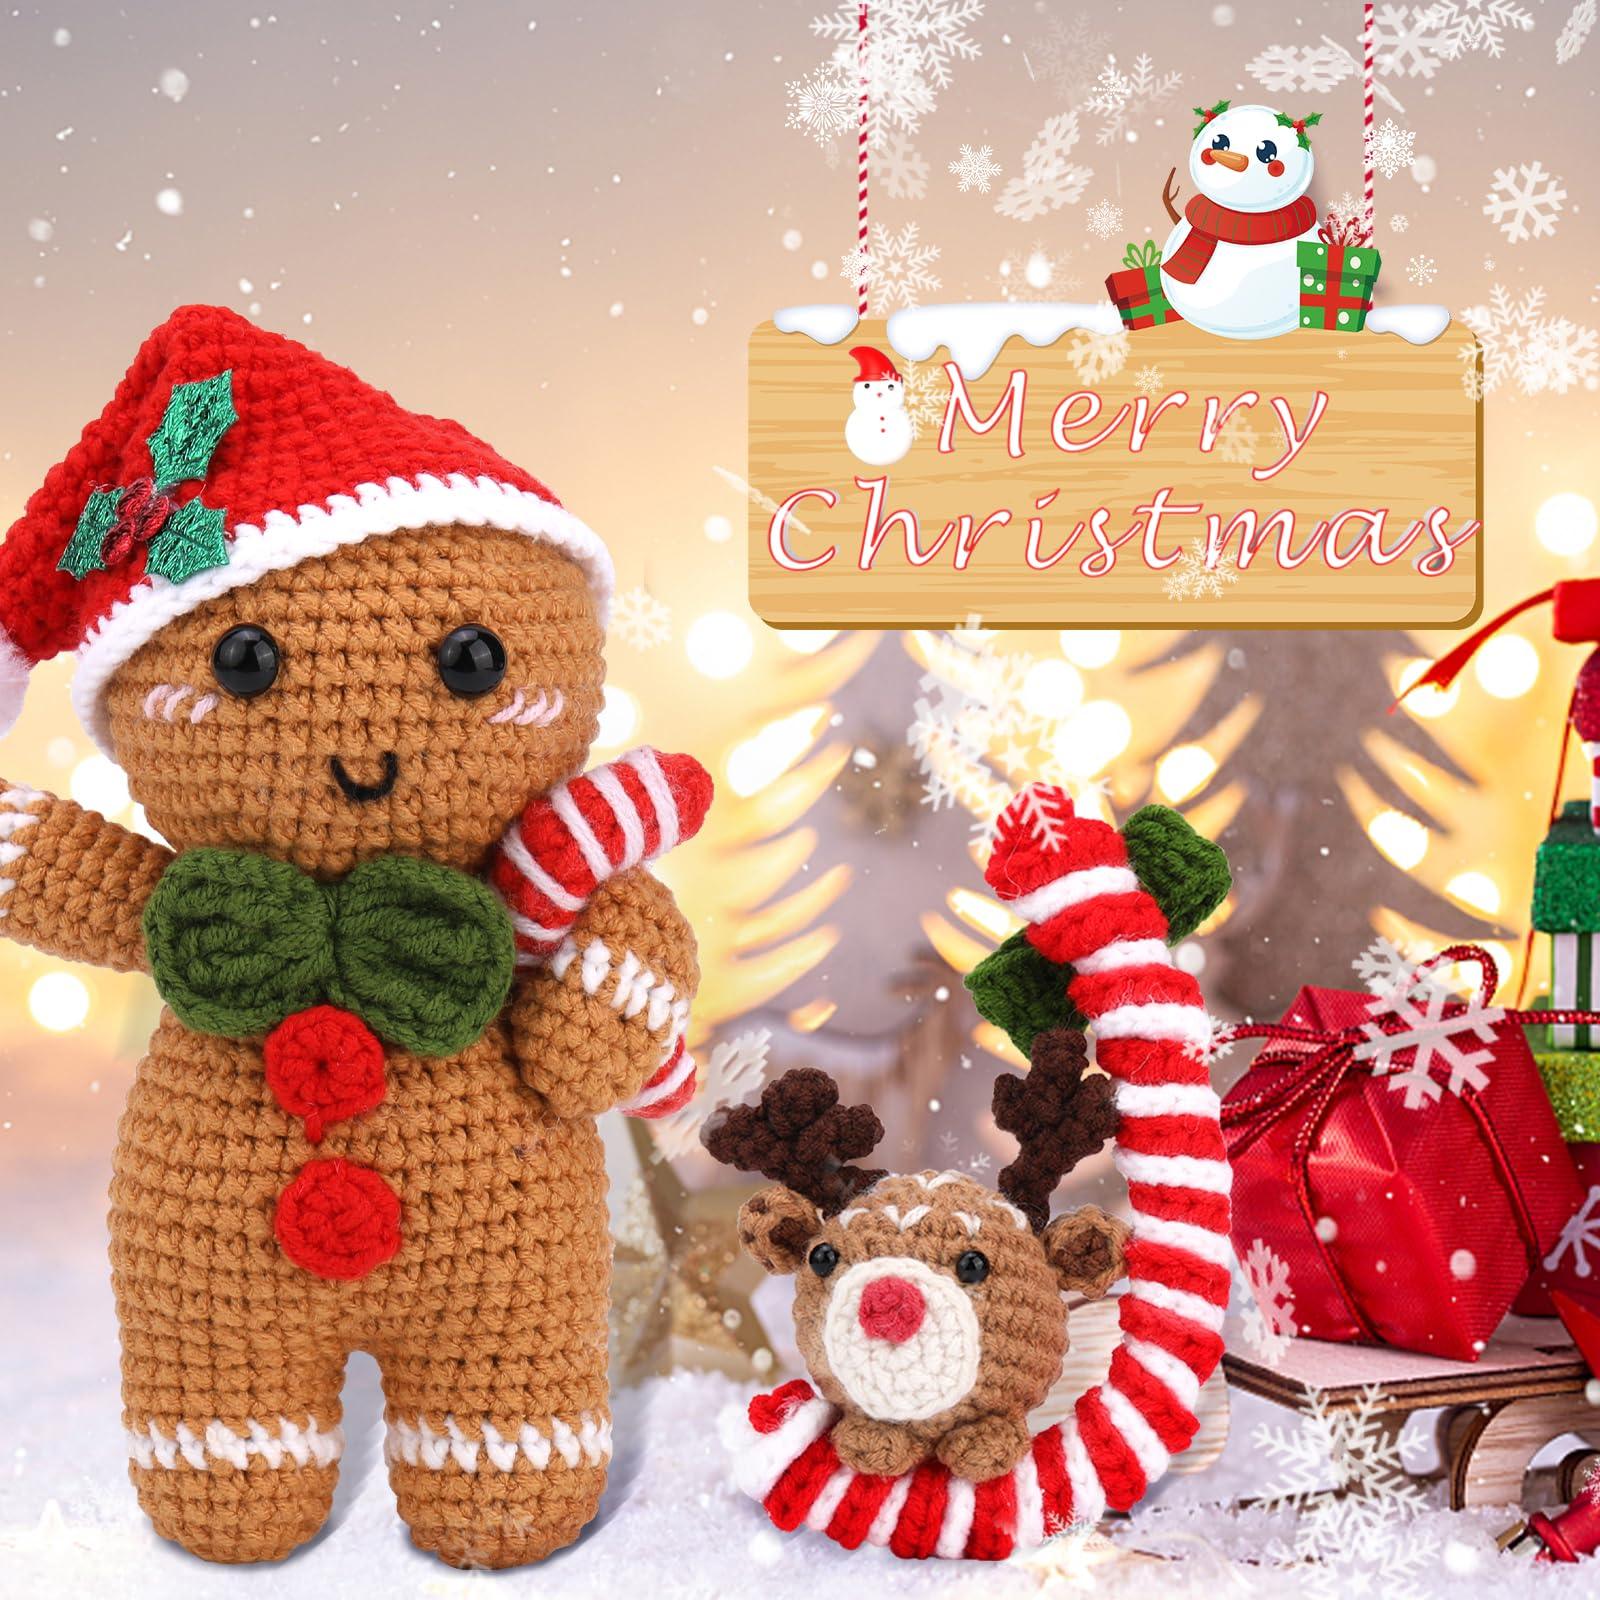 Geborn Christmas Crochet Kit for Adults and Kids with Crochet Yarn,Beginner  DIY Knitting Kit with Step-by-Step Video Tutorials (Gingerbread Man and